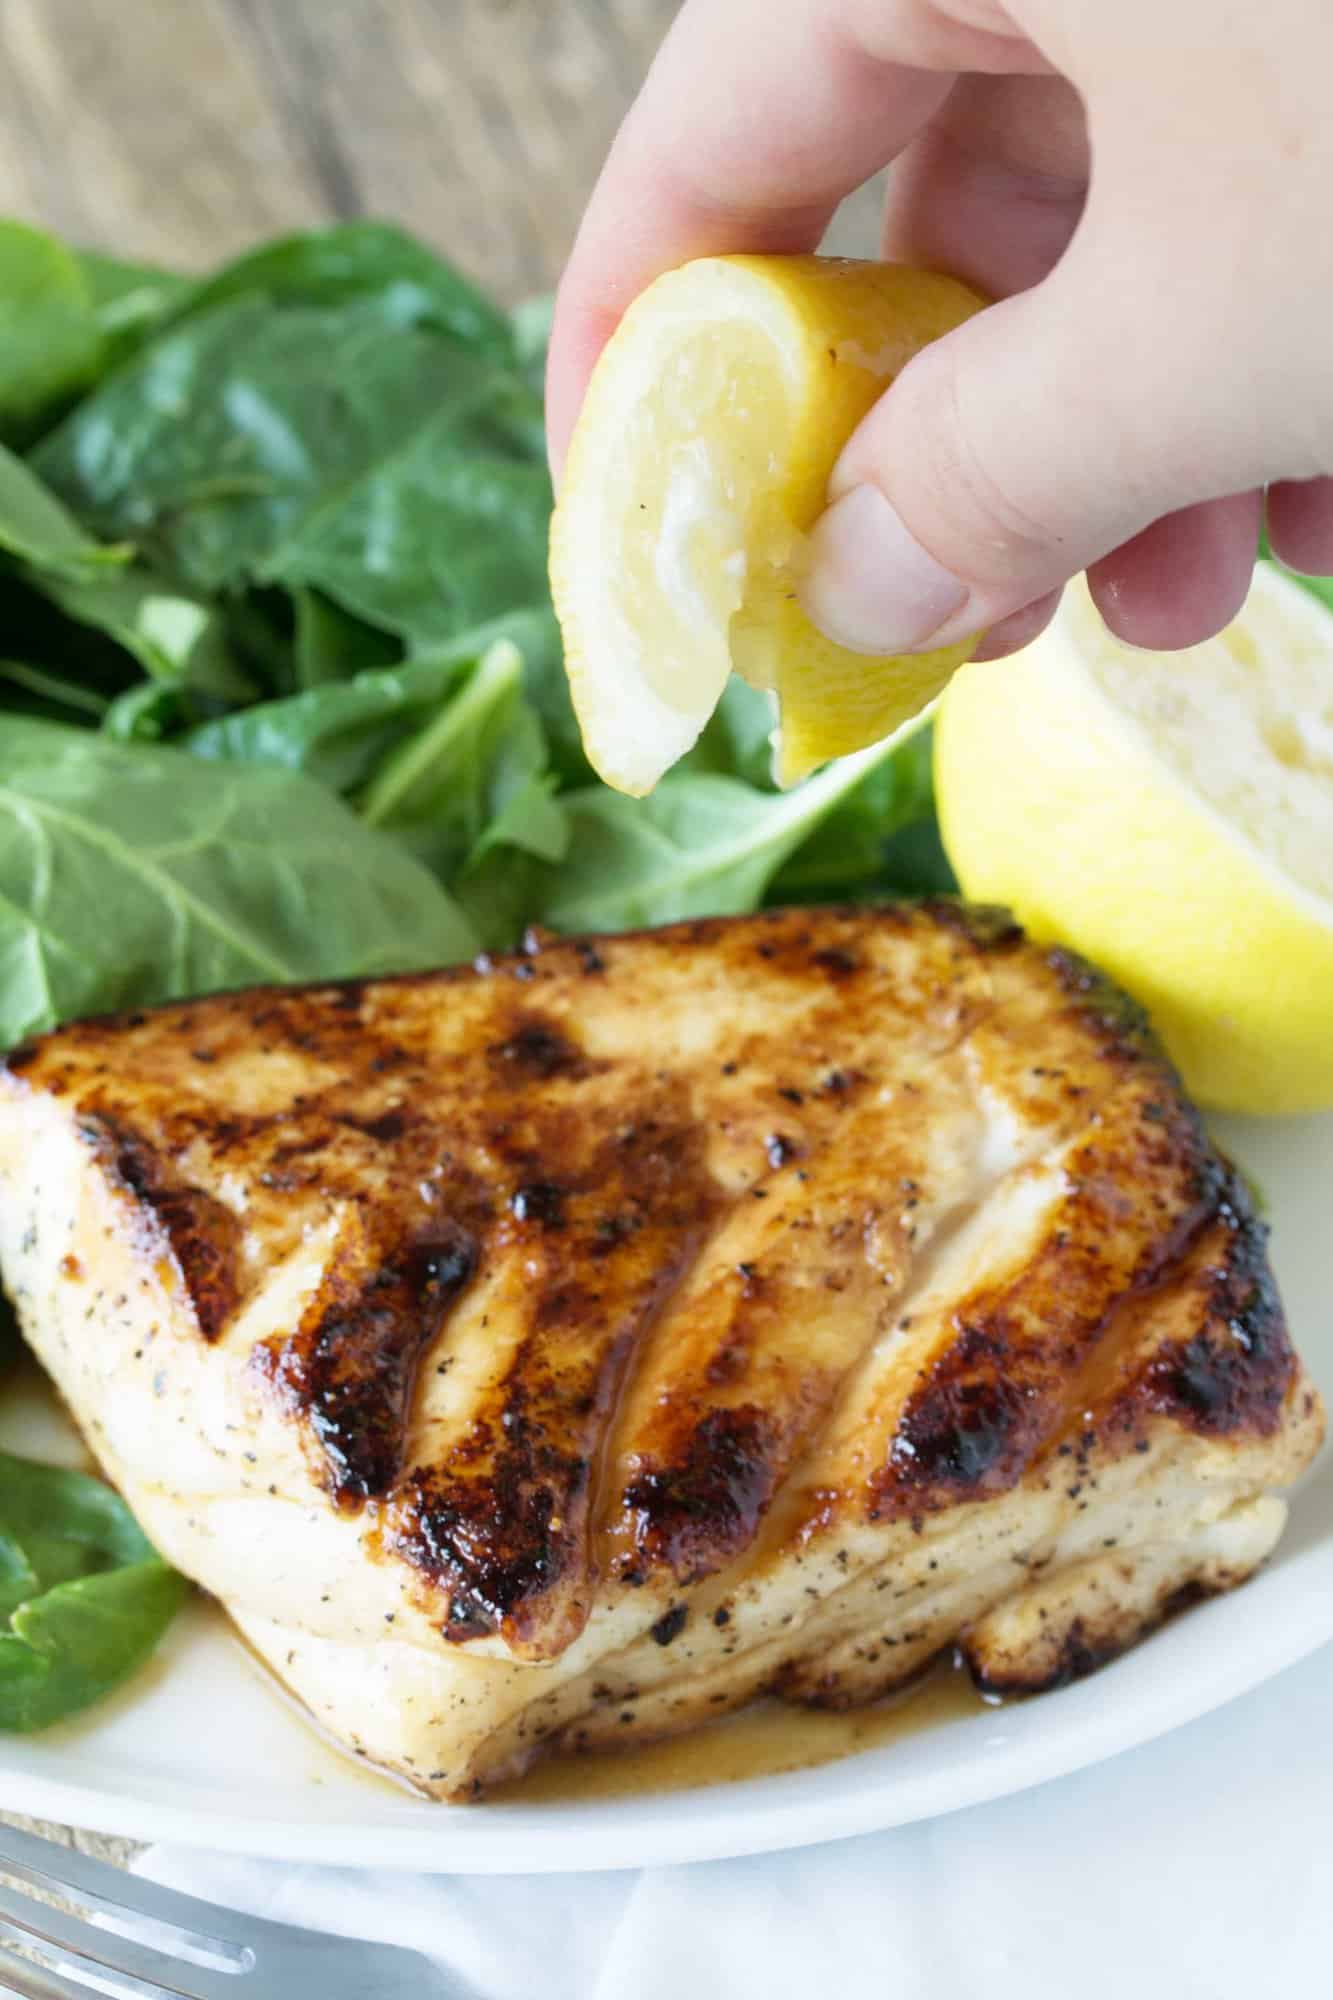 Enjoy a healthy and delicious meal ready in just minutes! Easy and delicious grilled halibut with honey and lemon will have you falling in love with fish for the first time, or all over again!